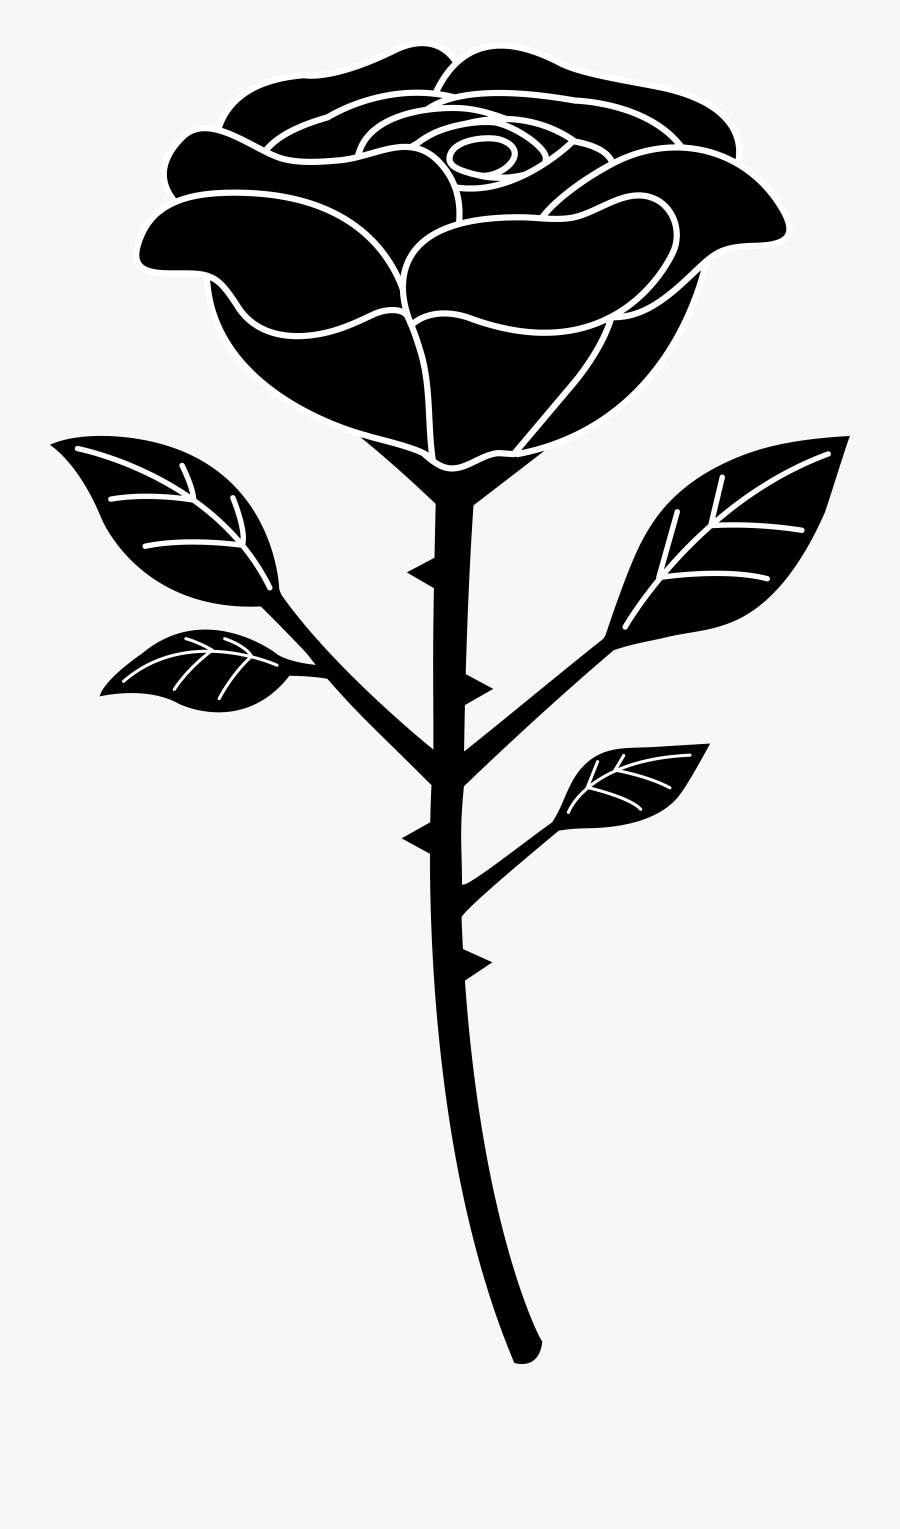 Black And White Photos - Black Rose Vector Png, Transparent Clipart